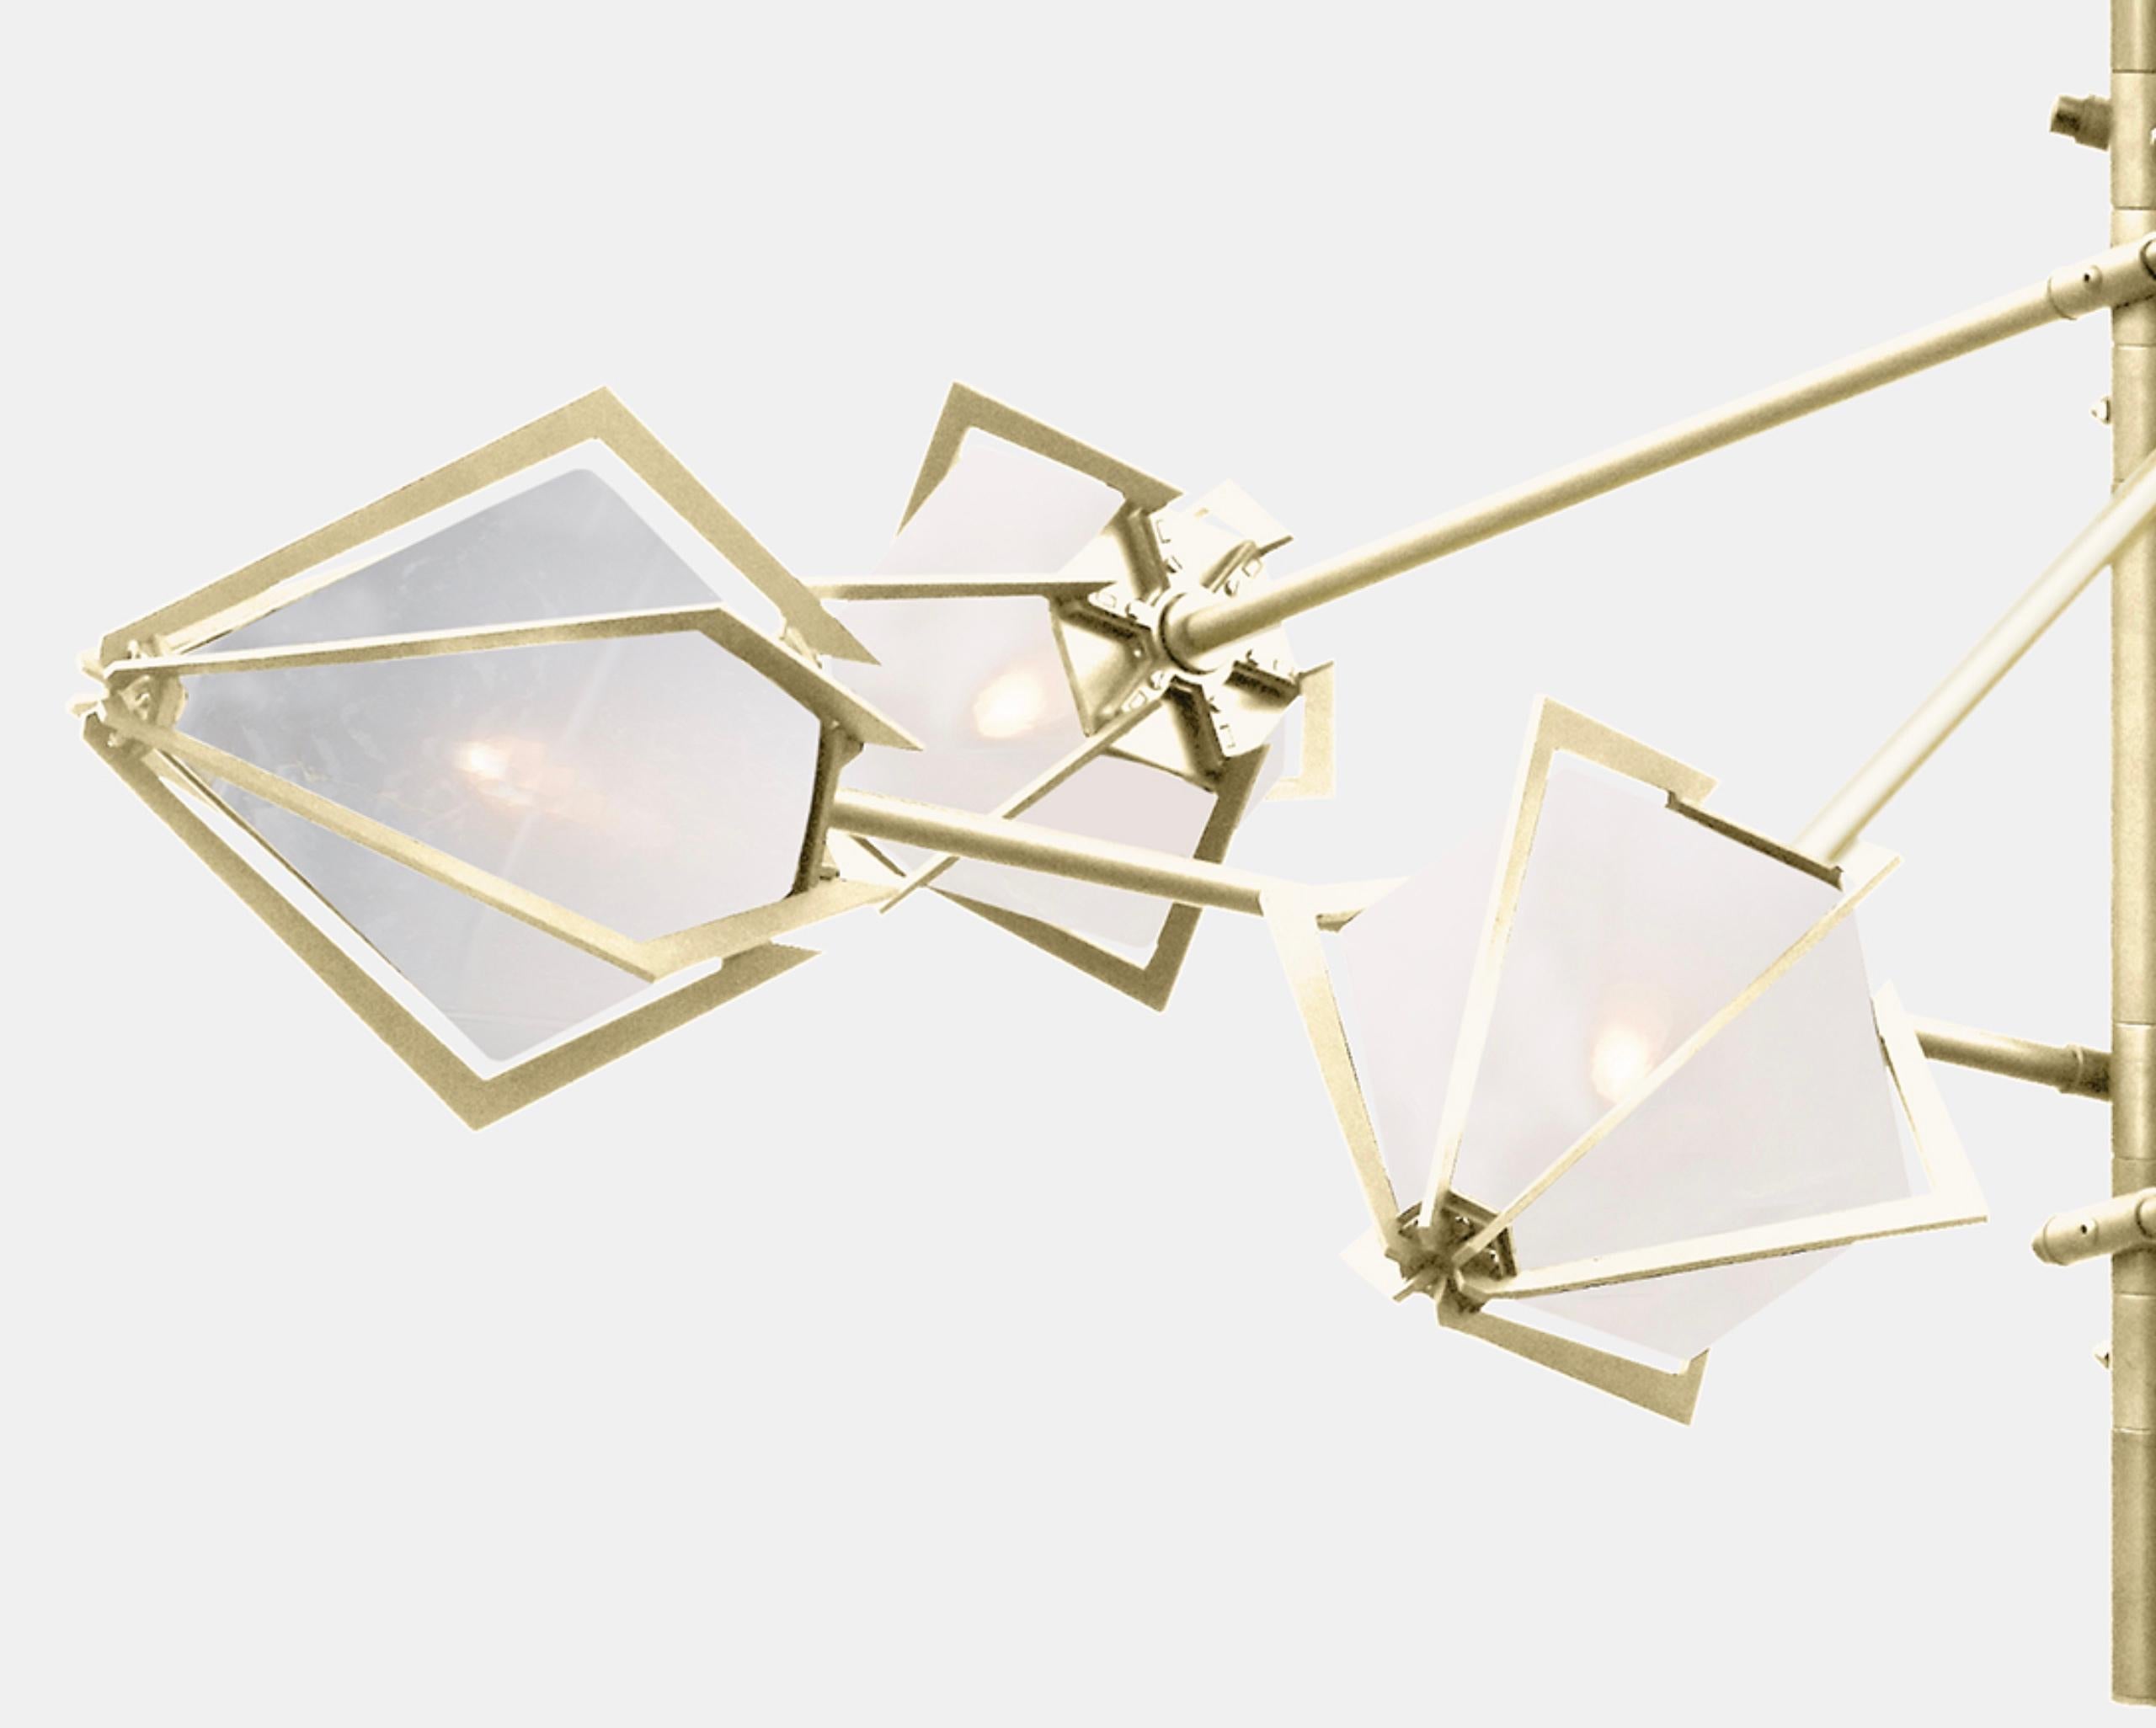 Canadian Harlow Spoke Chandelier Small in Satin Brass and Alabaster White Glass For Sale